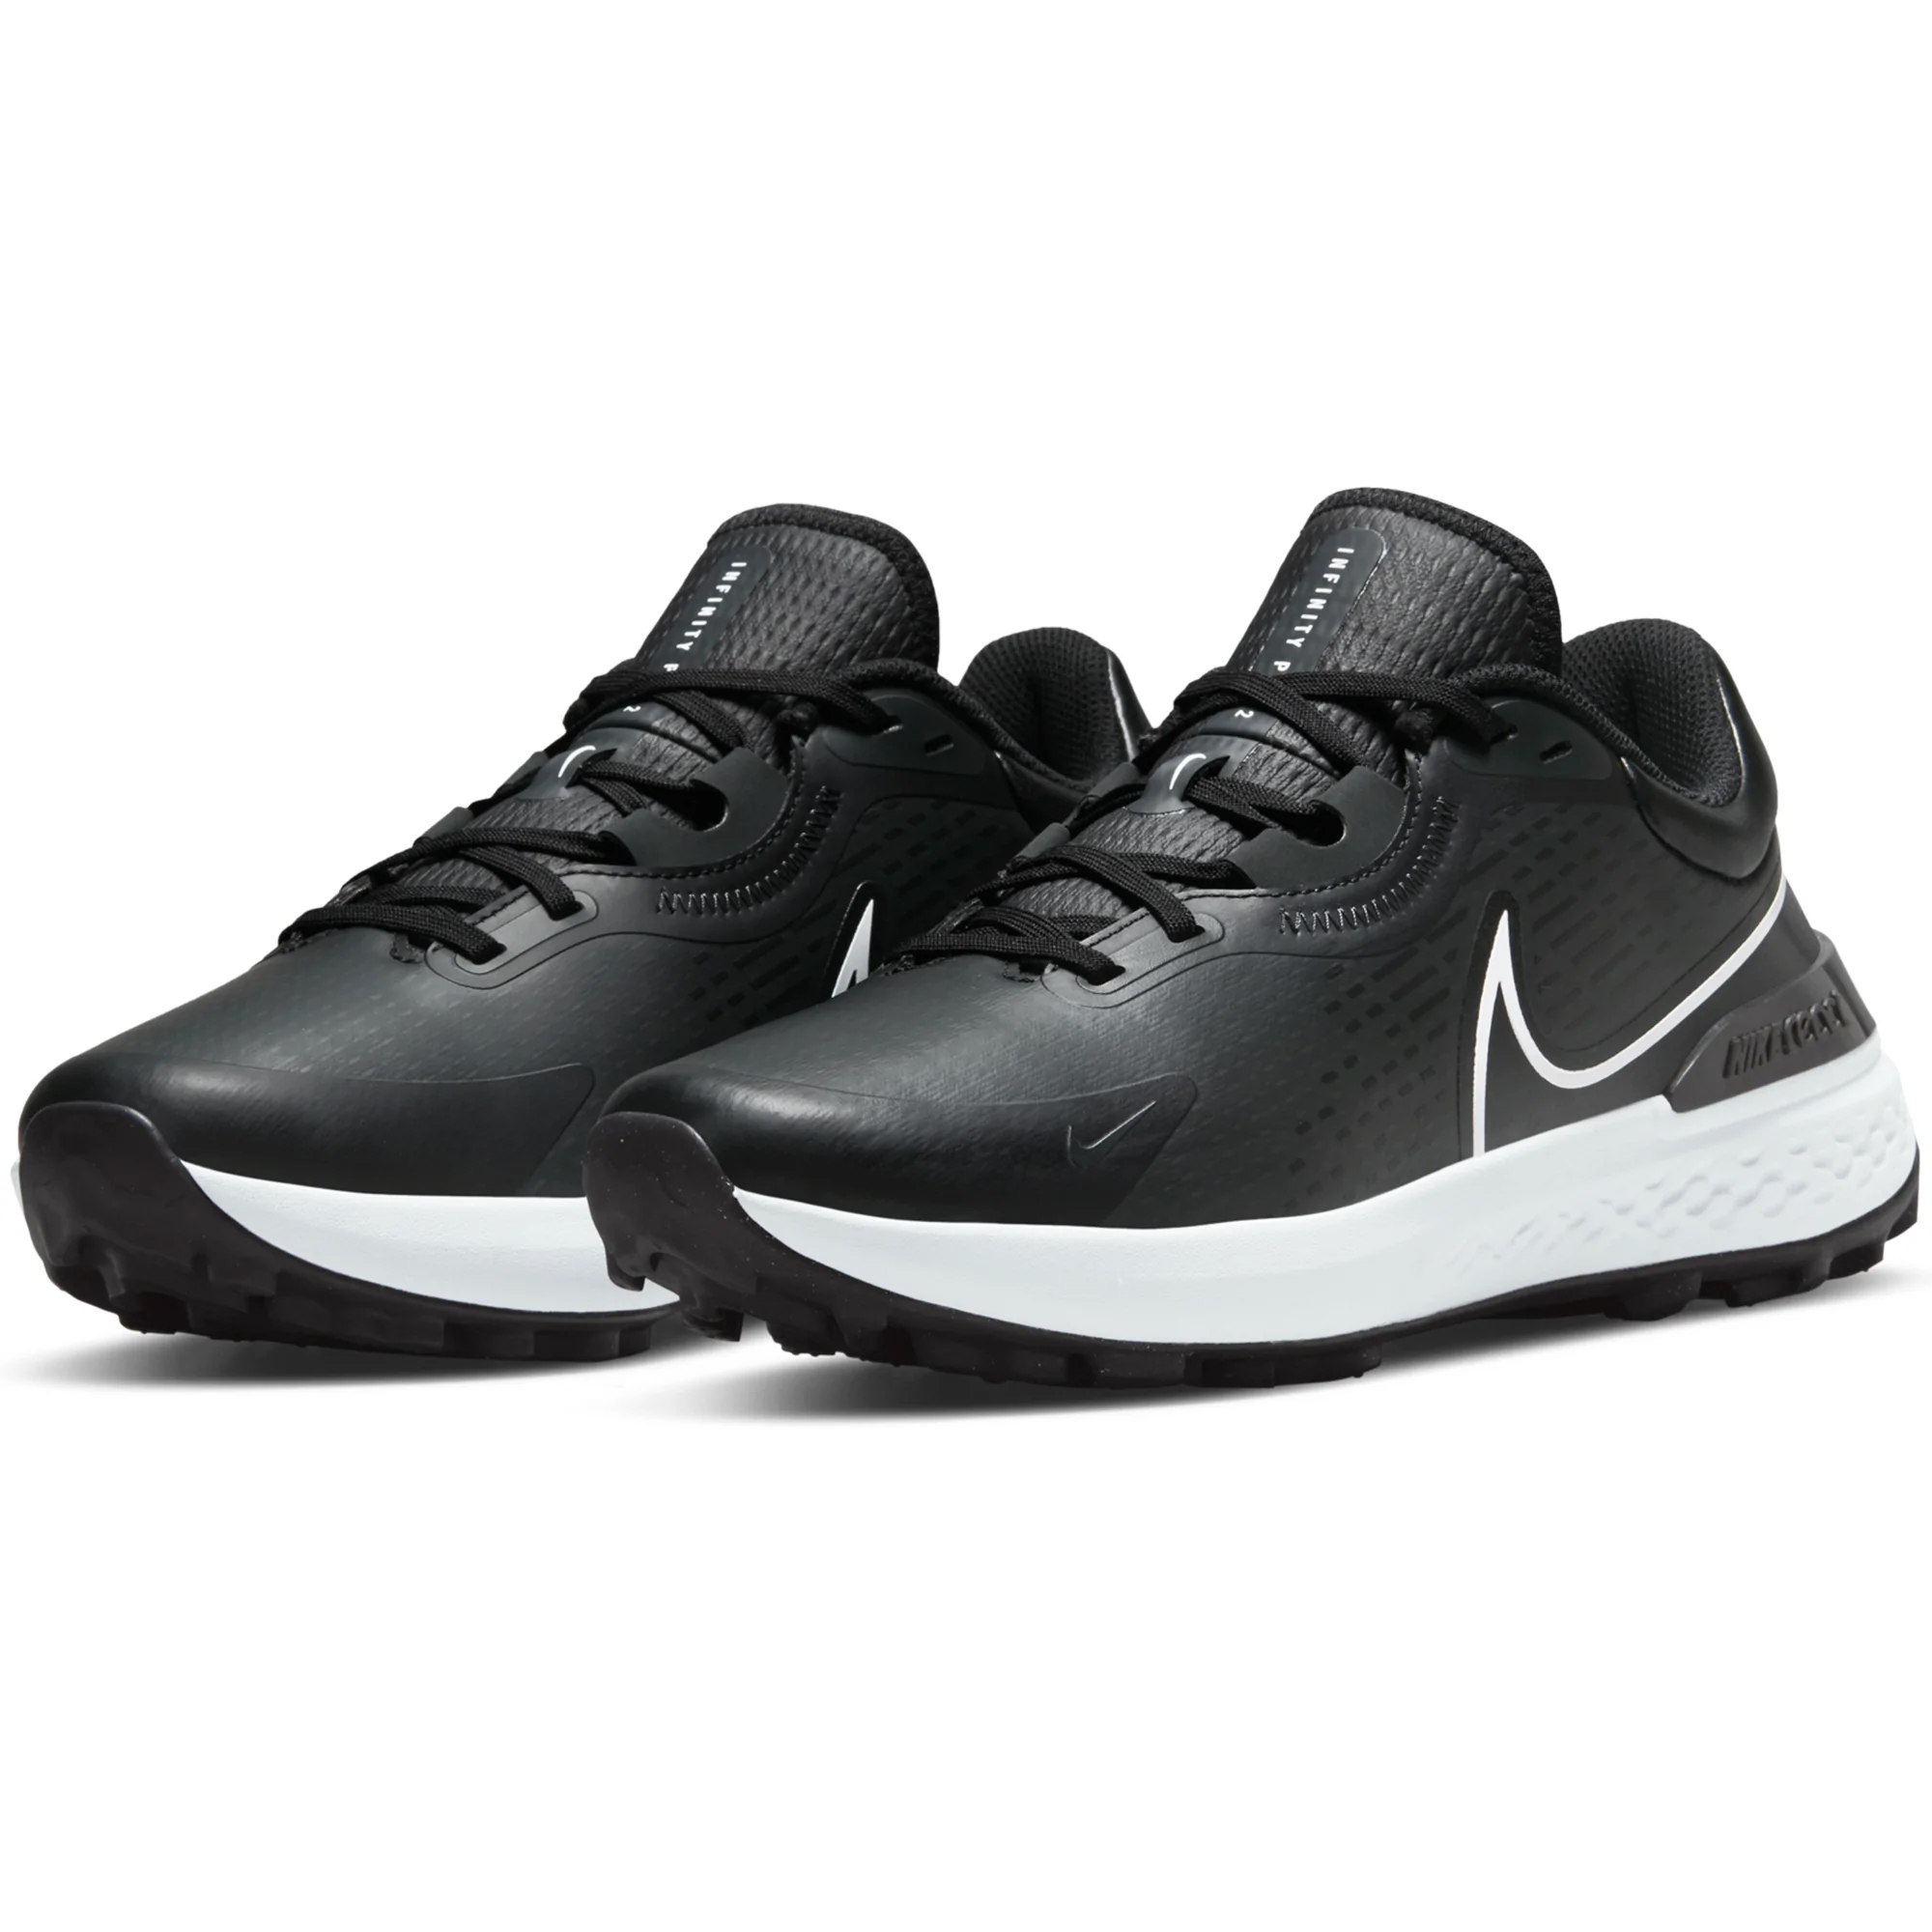 Nike Infinity Pro 2 Mens Spikeless Golf Shoes 